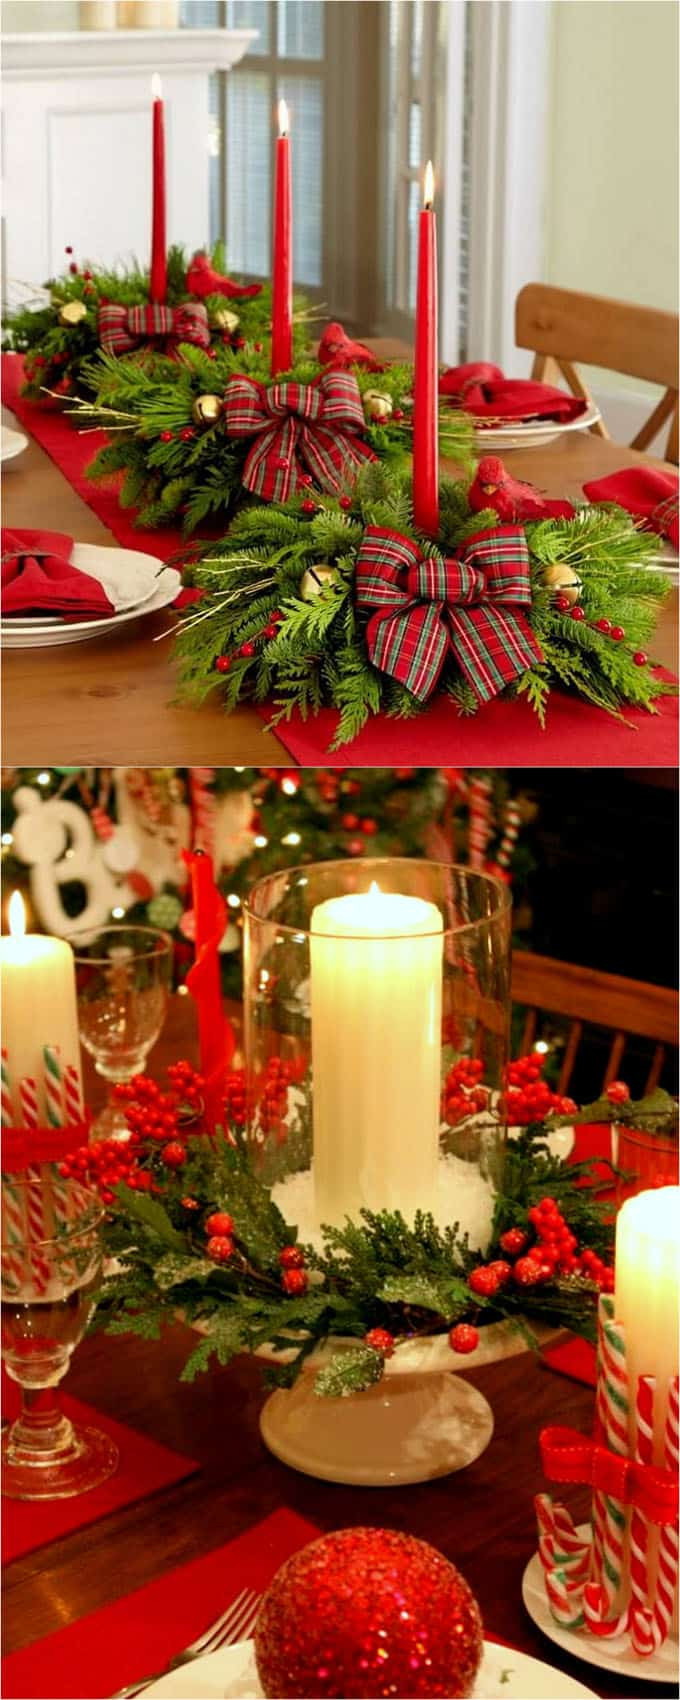 DIY Christmas Centerpieces
 27 Gorgeous DIY Thanksgiving & Christmas Table Decorations